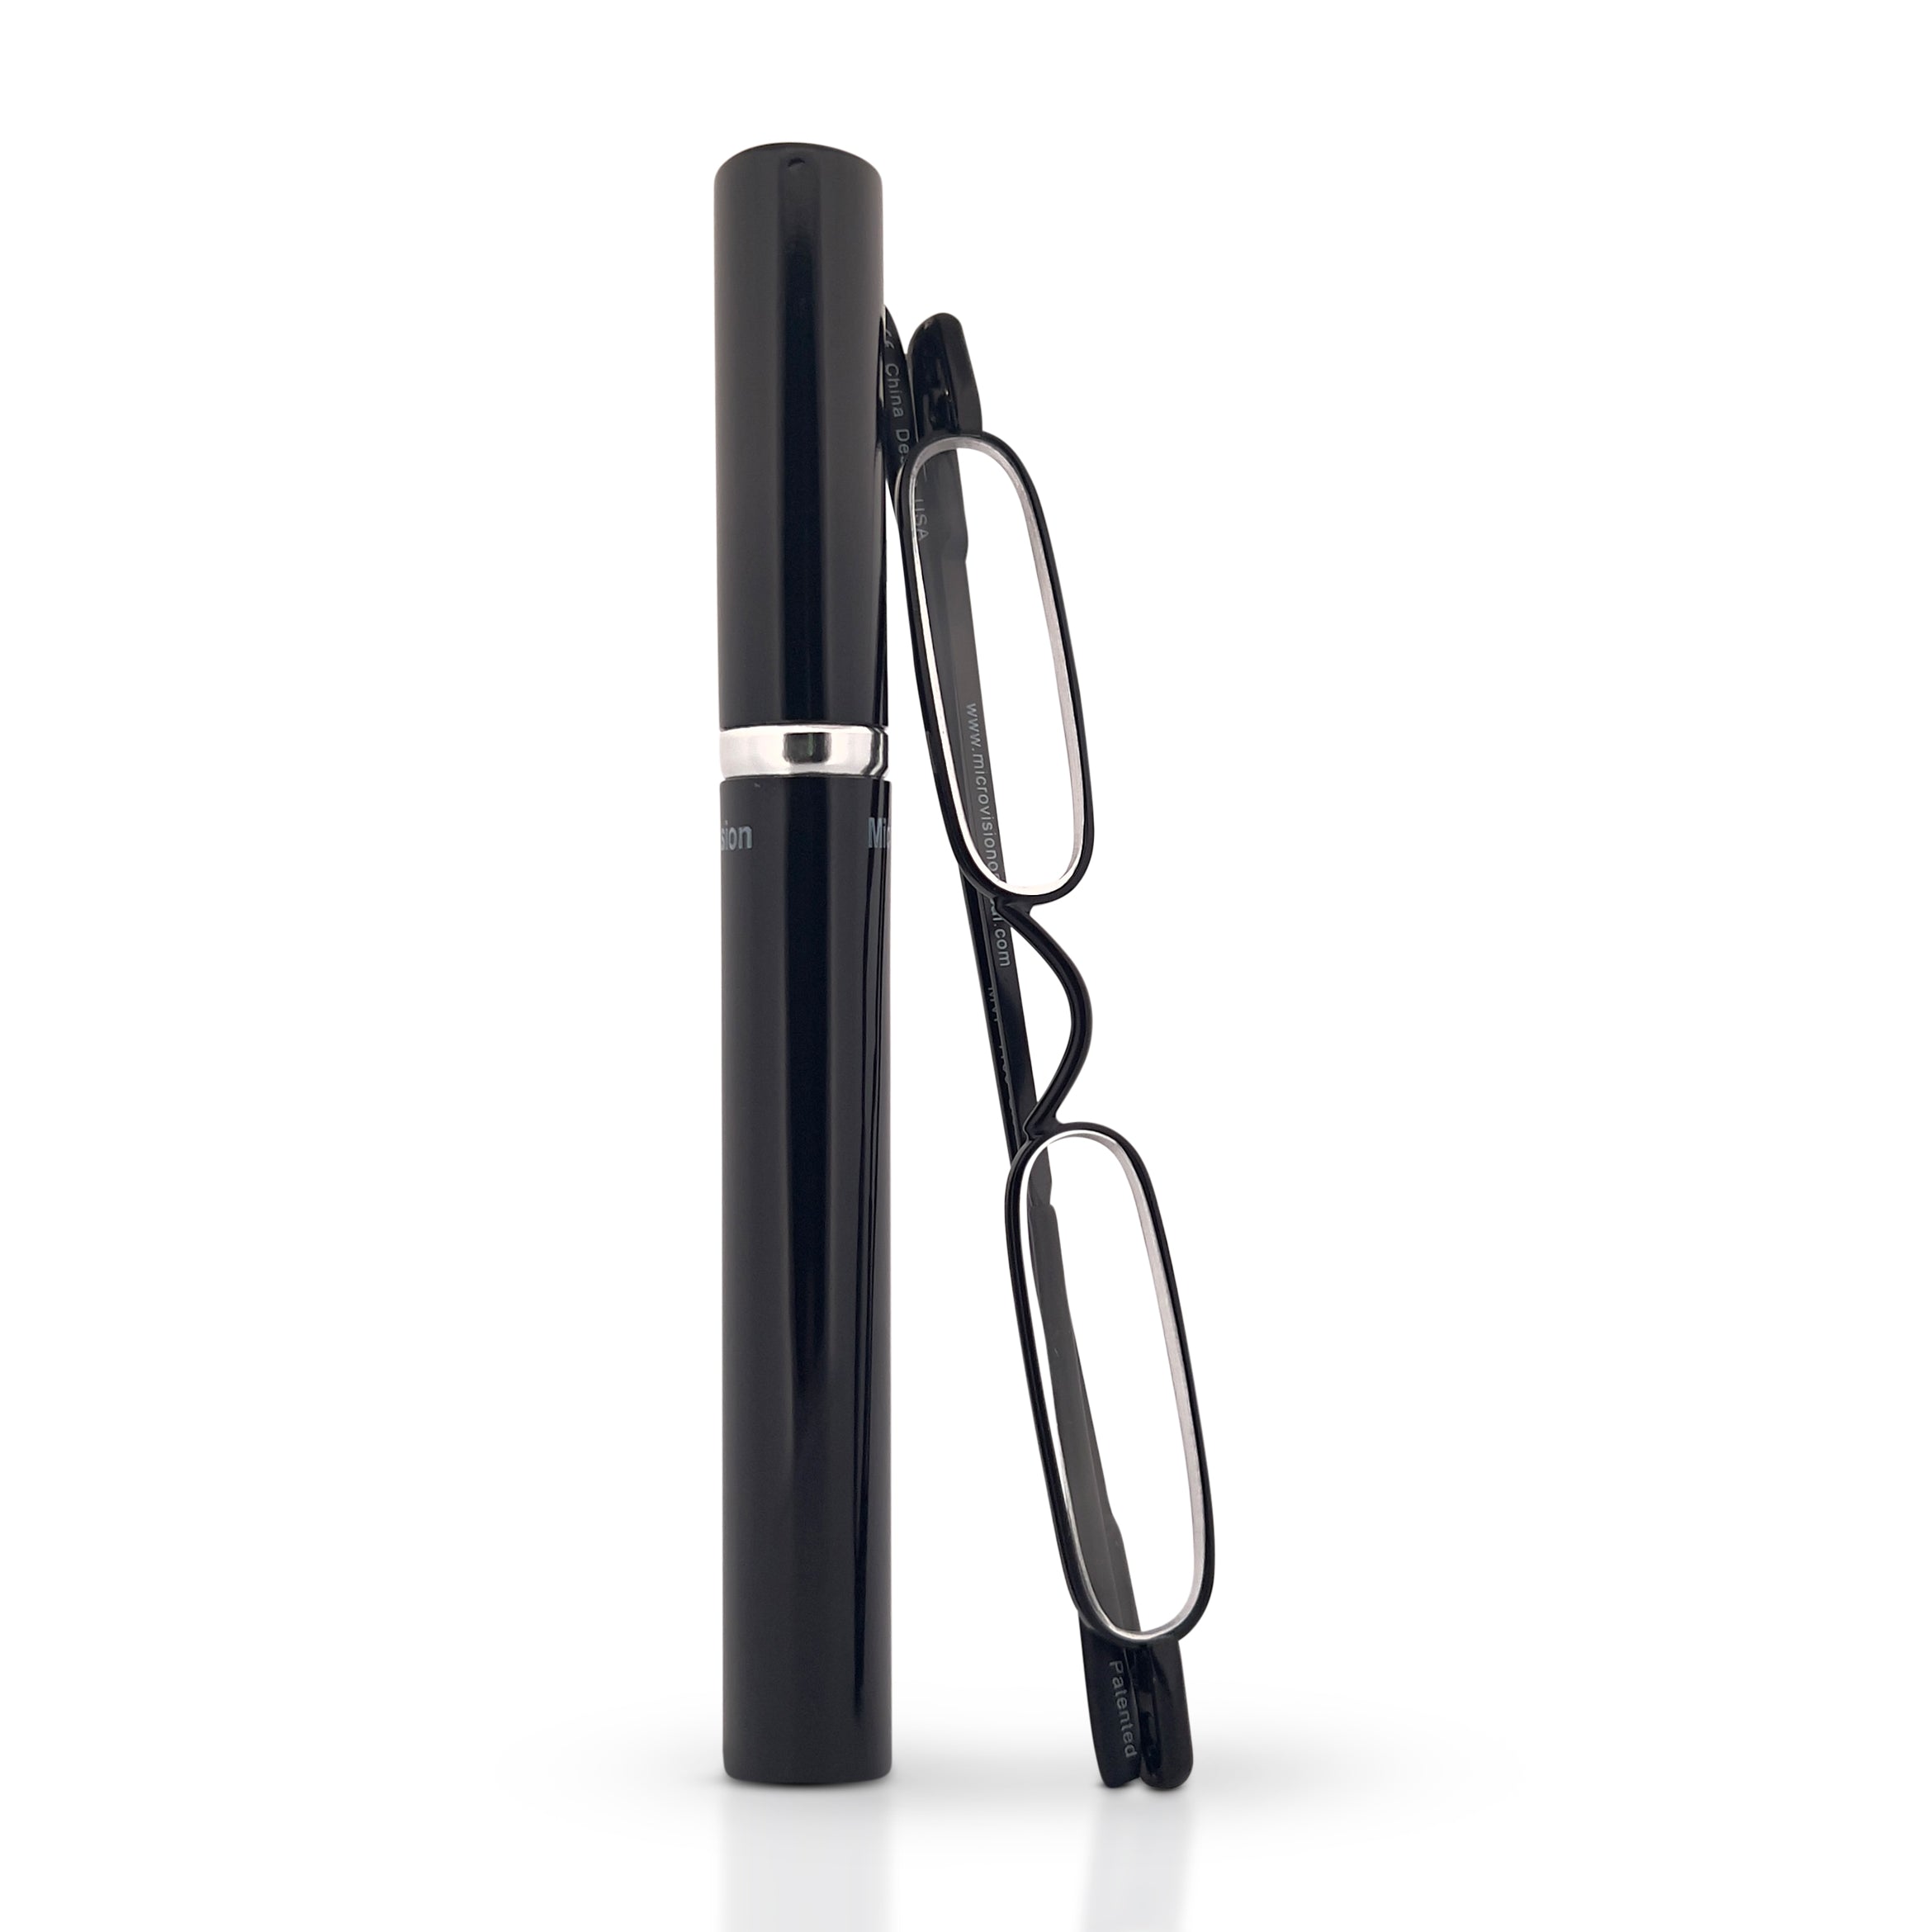 Black sleek, compact, patented, stainless steel, original mini readers perfect for on the go